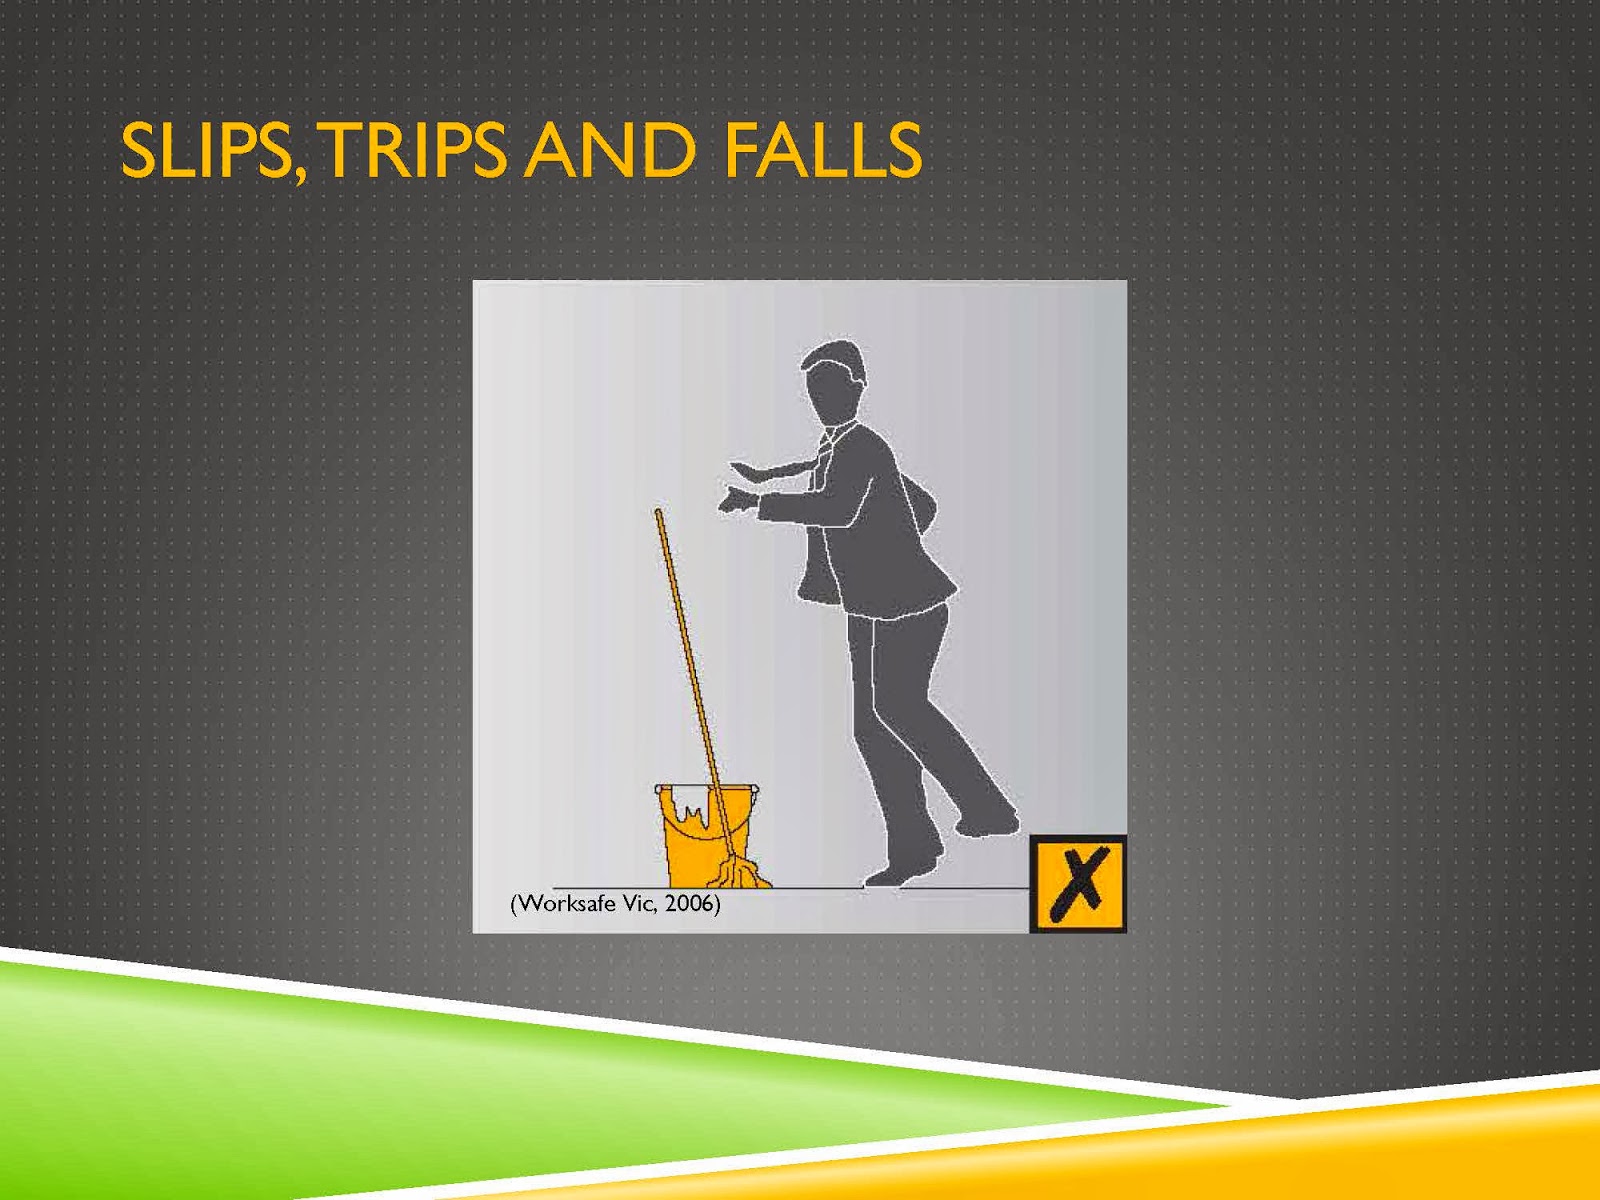 SLIPS, TRIPS AND FALLS